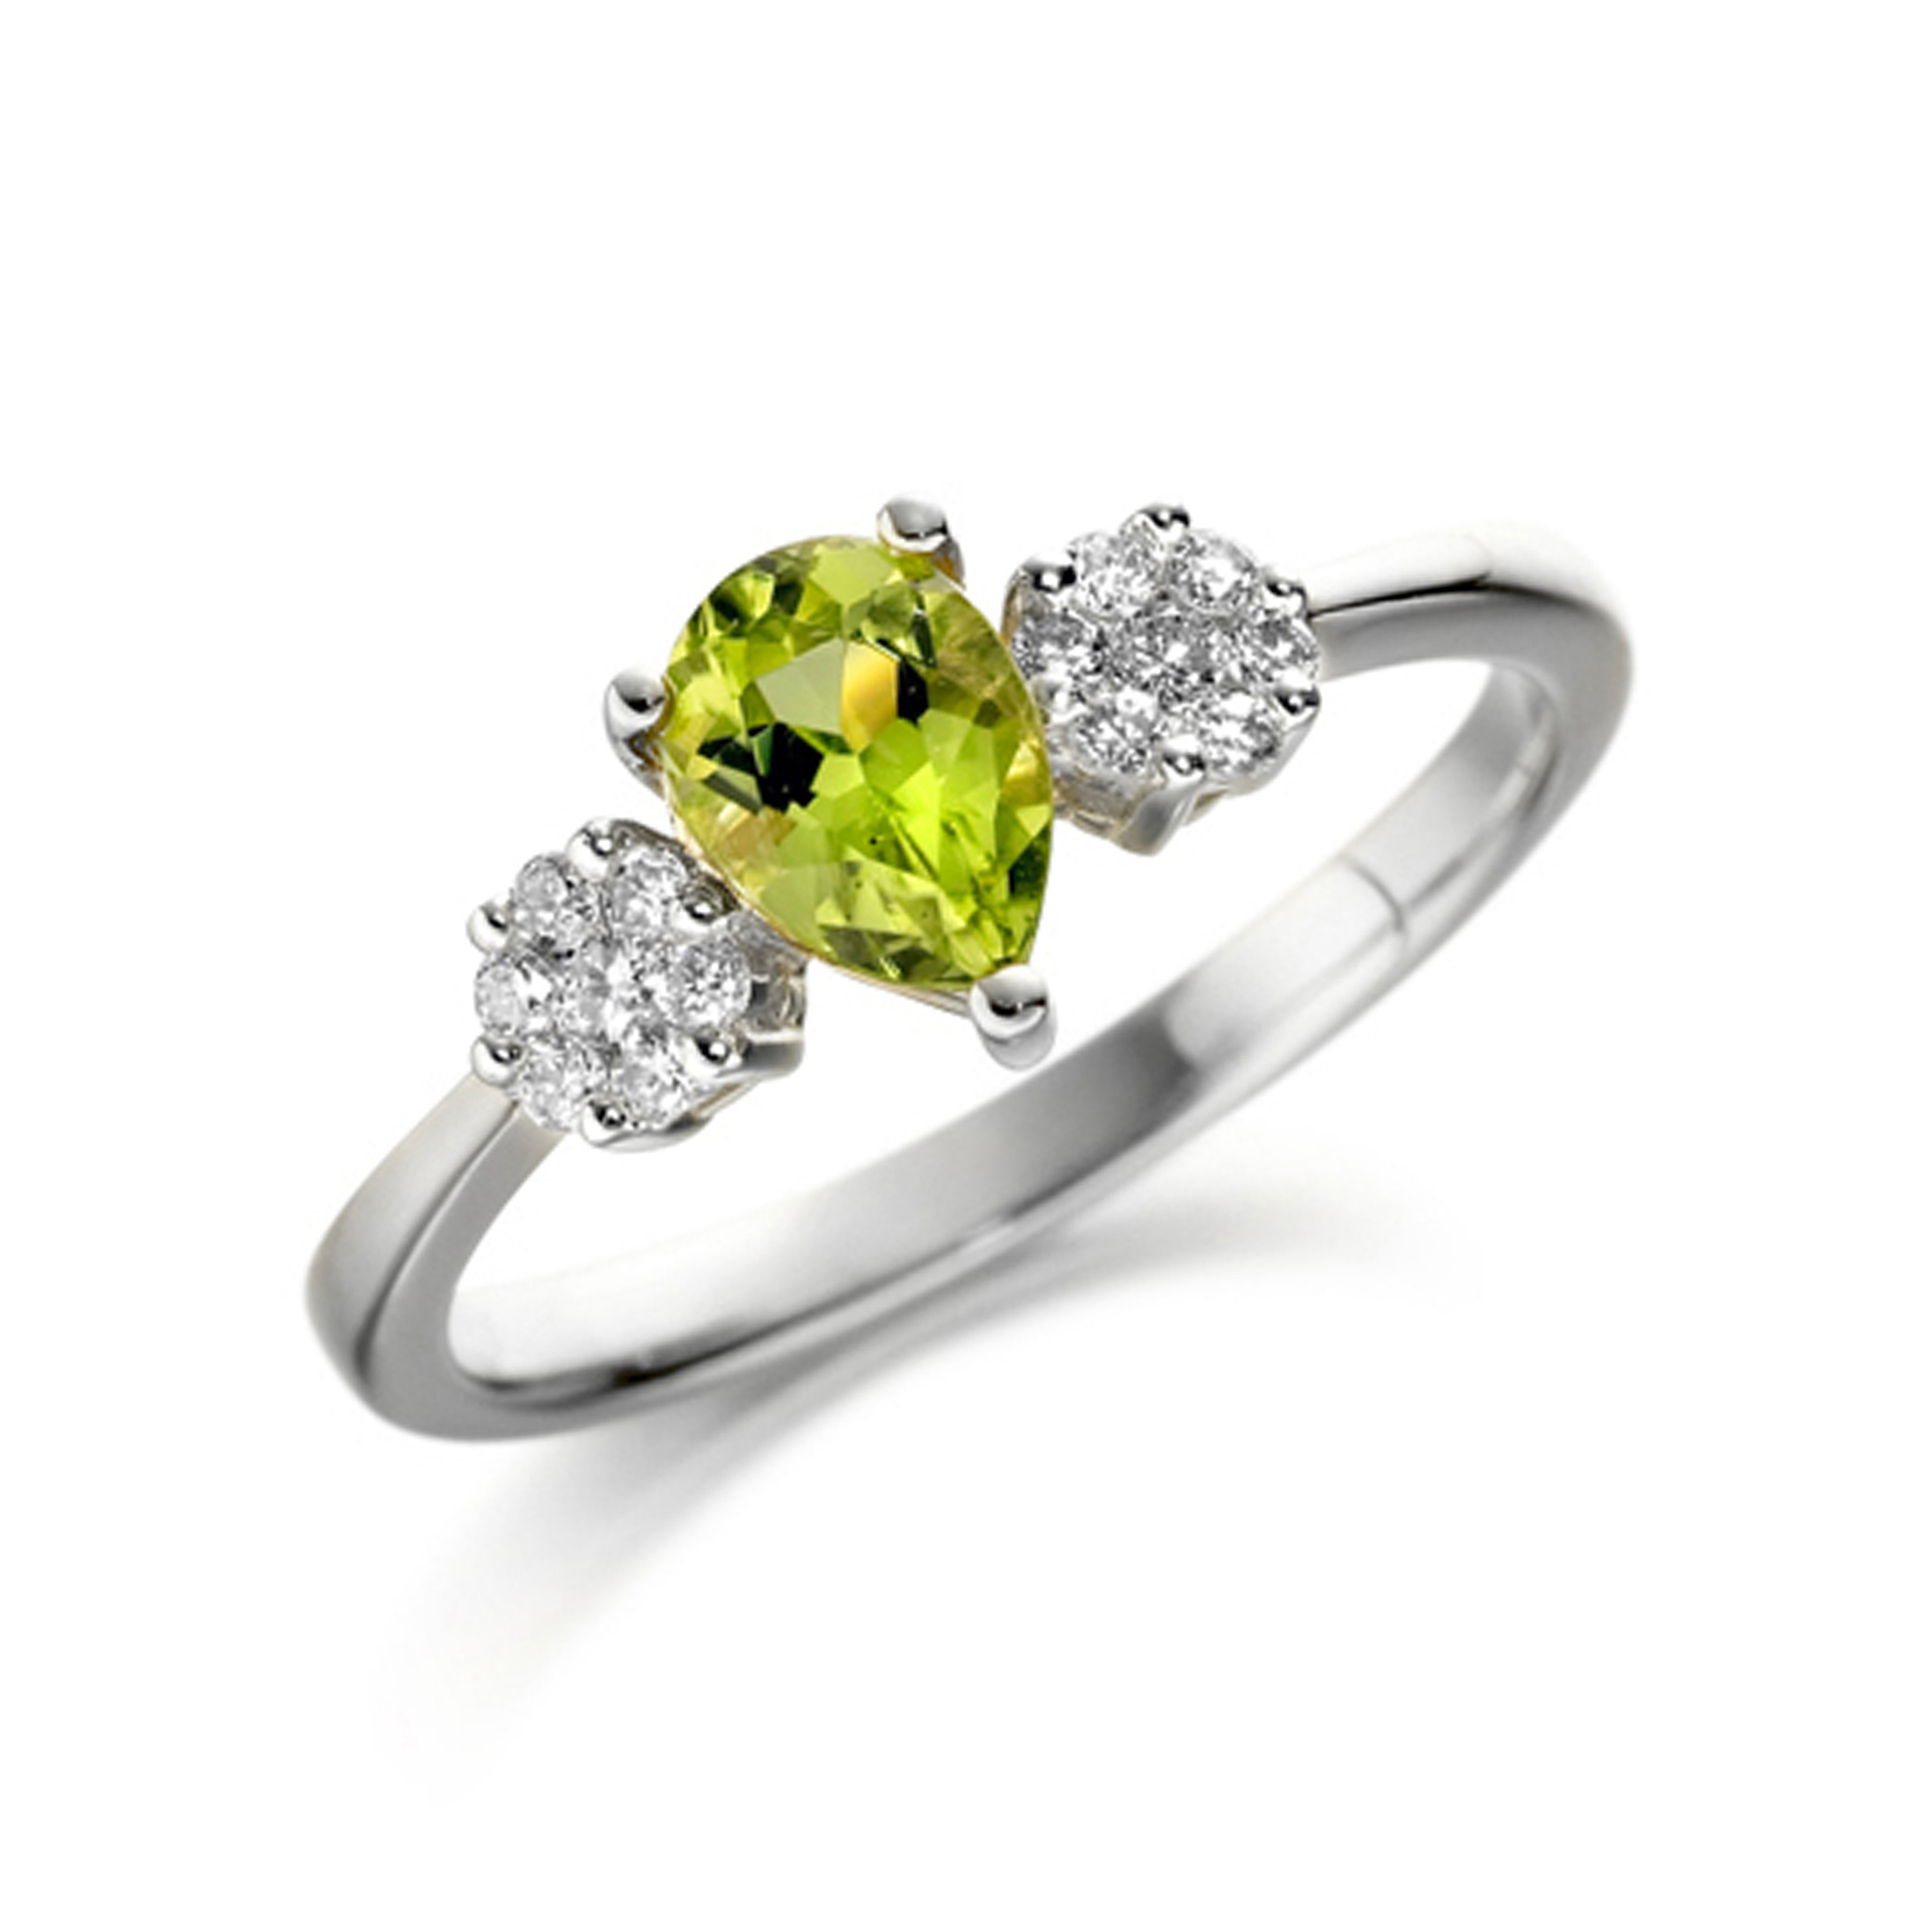 6X4mm Pear Peridot Stones On Shoulder Diamond And Gemstone Engagement Ring